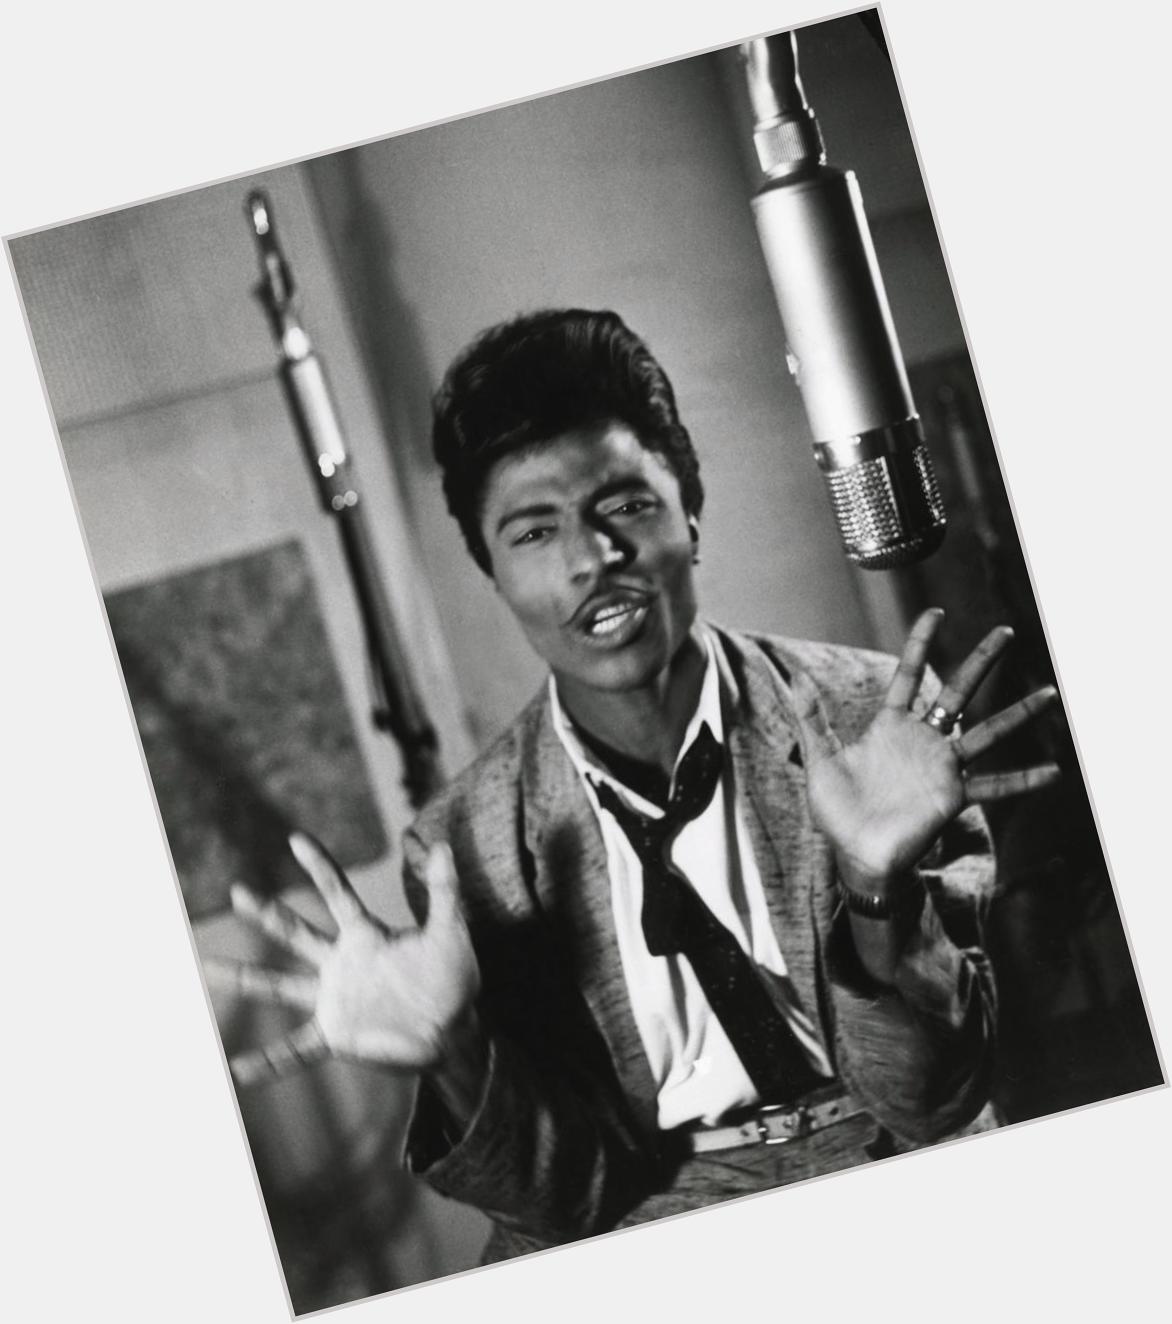 Happy Birthday to Little Richard, who turns 82 today! 